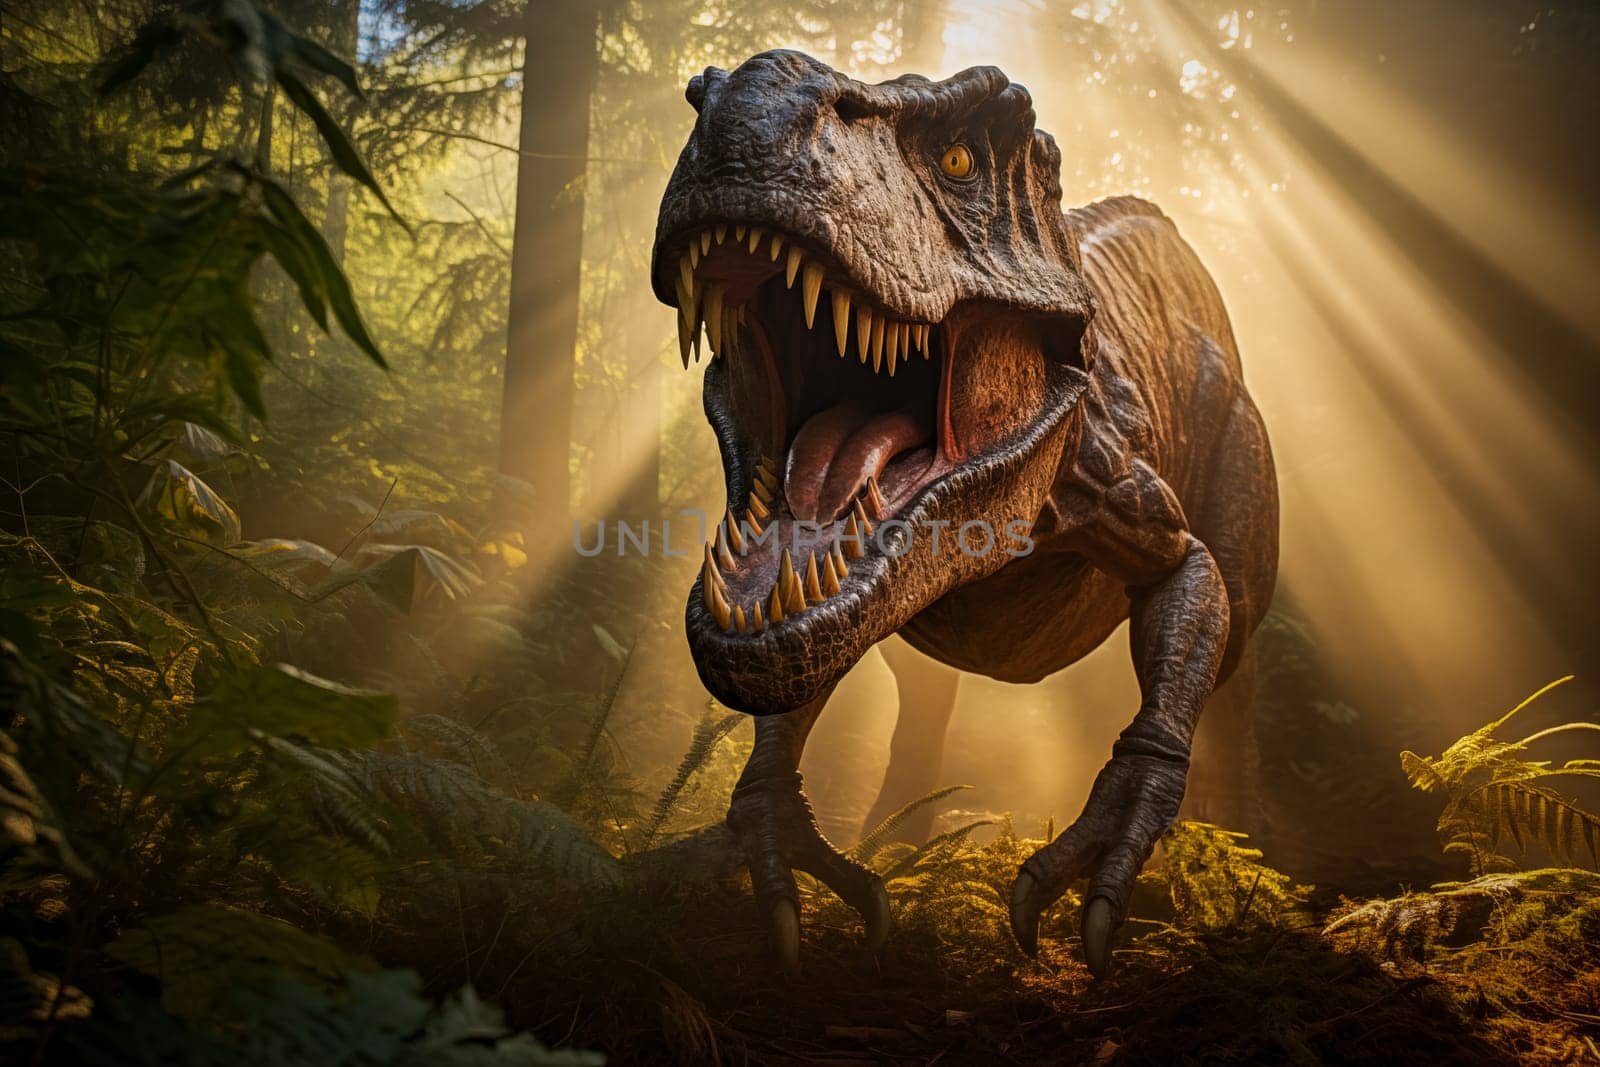 Tyrannosaurus rex roaring in a prehistoric forest with ferns and sunlight by dimol